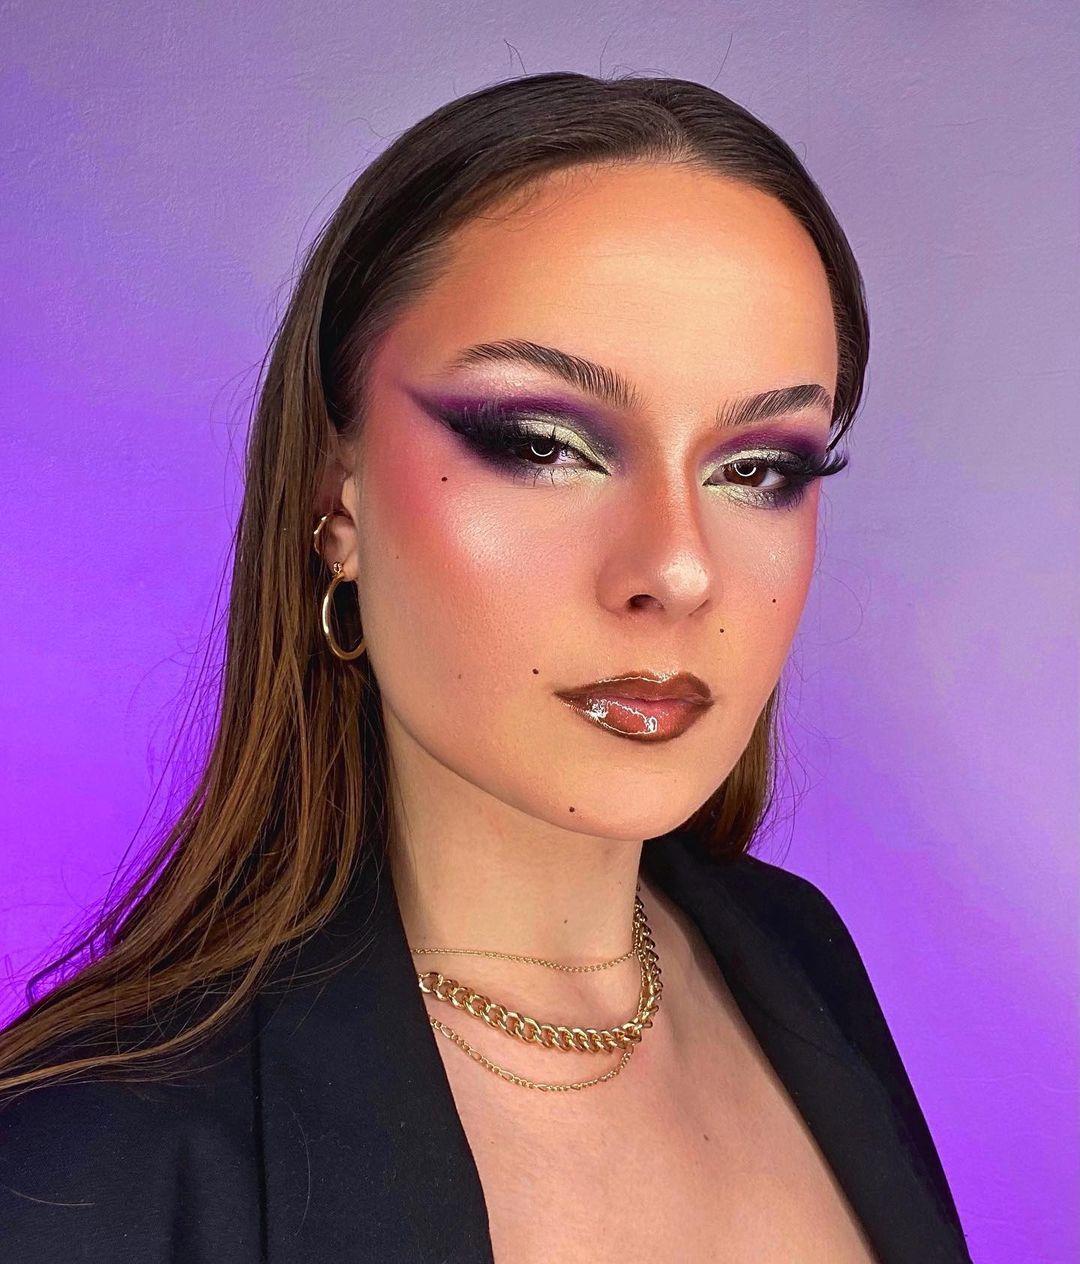 We can't get over this gorgeous smoked out glam from @oranemakeup 😍 She uses Jumbo Eye Pencil in 'Frappe' + Ultimate Shadow Palette in 'Utopia' to complete the look 💜 • #nyxcosmetics #nyxprofessionalmakeup #crueltyfreebeauty